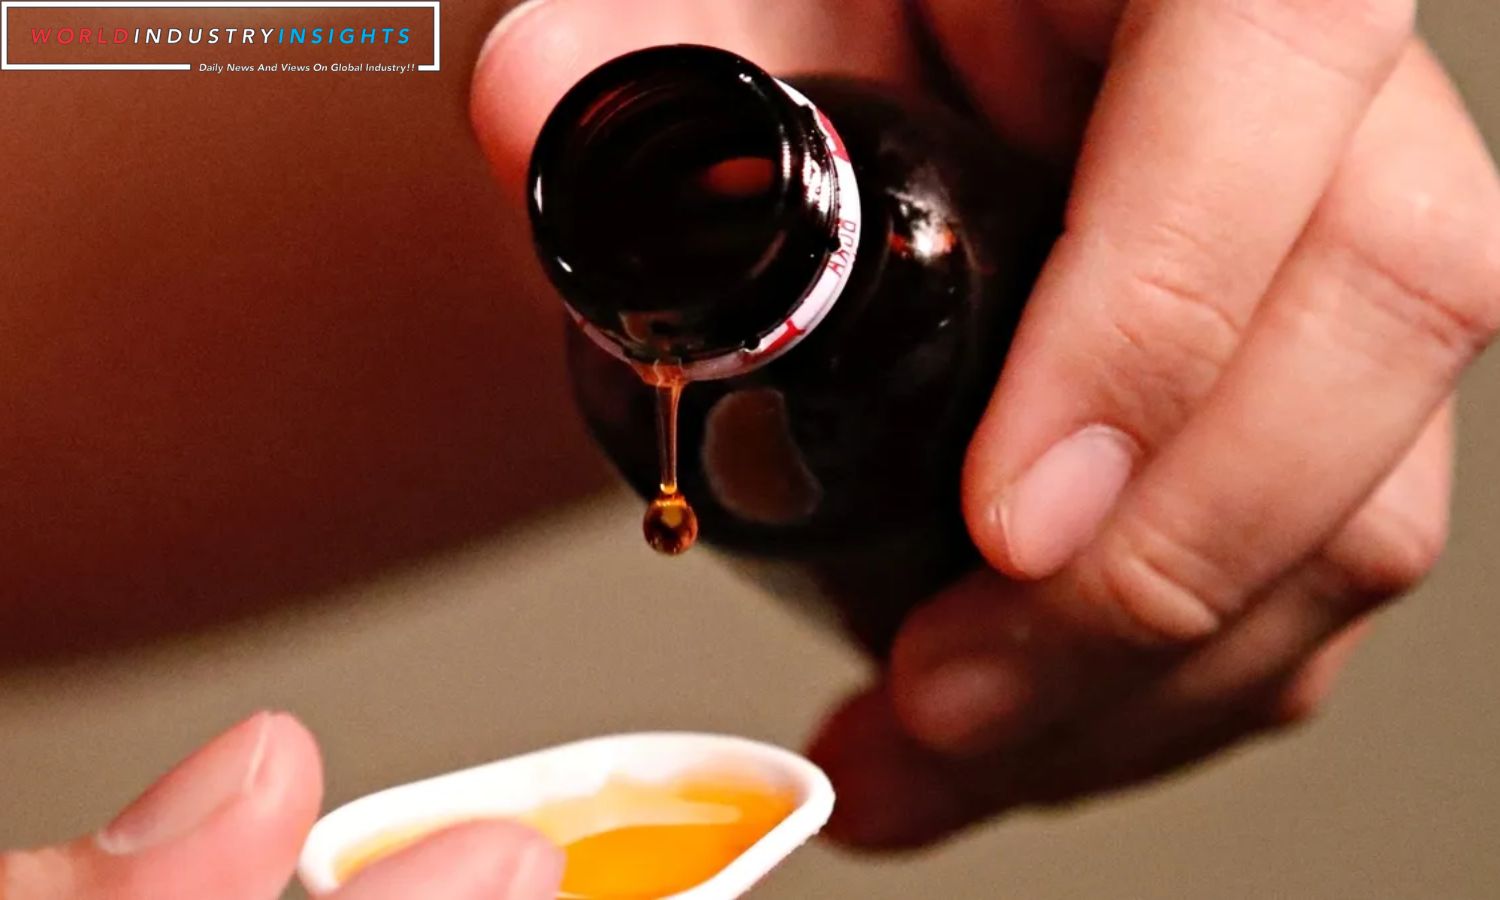 Indonesian Cough Syrup Tragedy